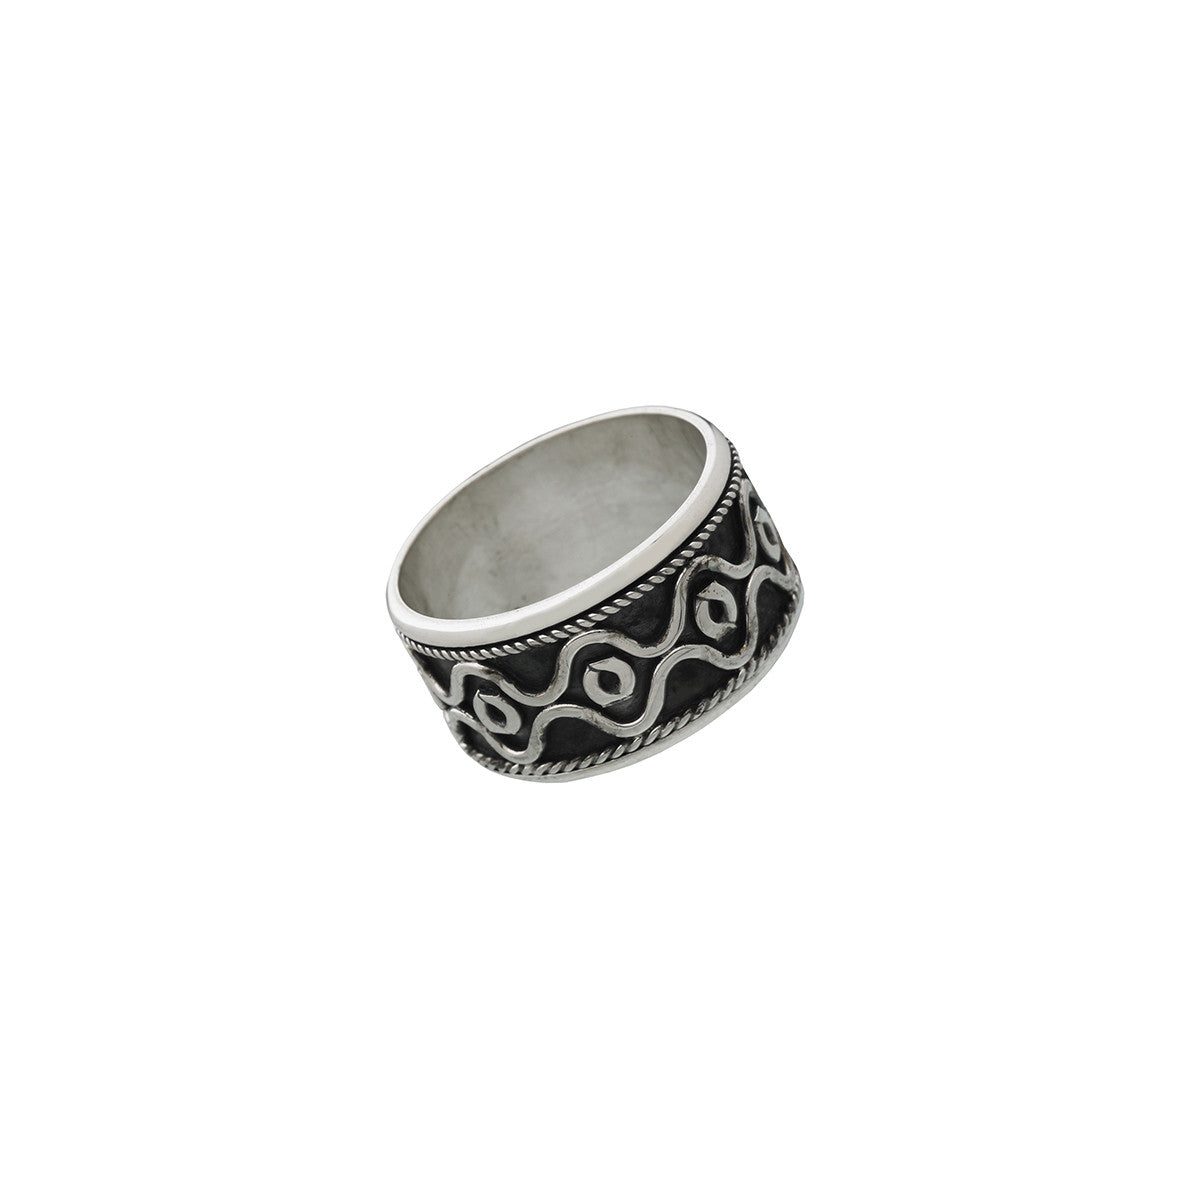 Kappa Infinity Sterling Silver Spin Ring - Cynthia Gale New York Jewelry